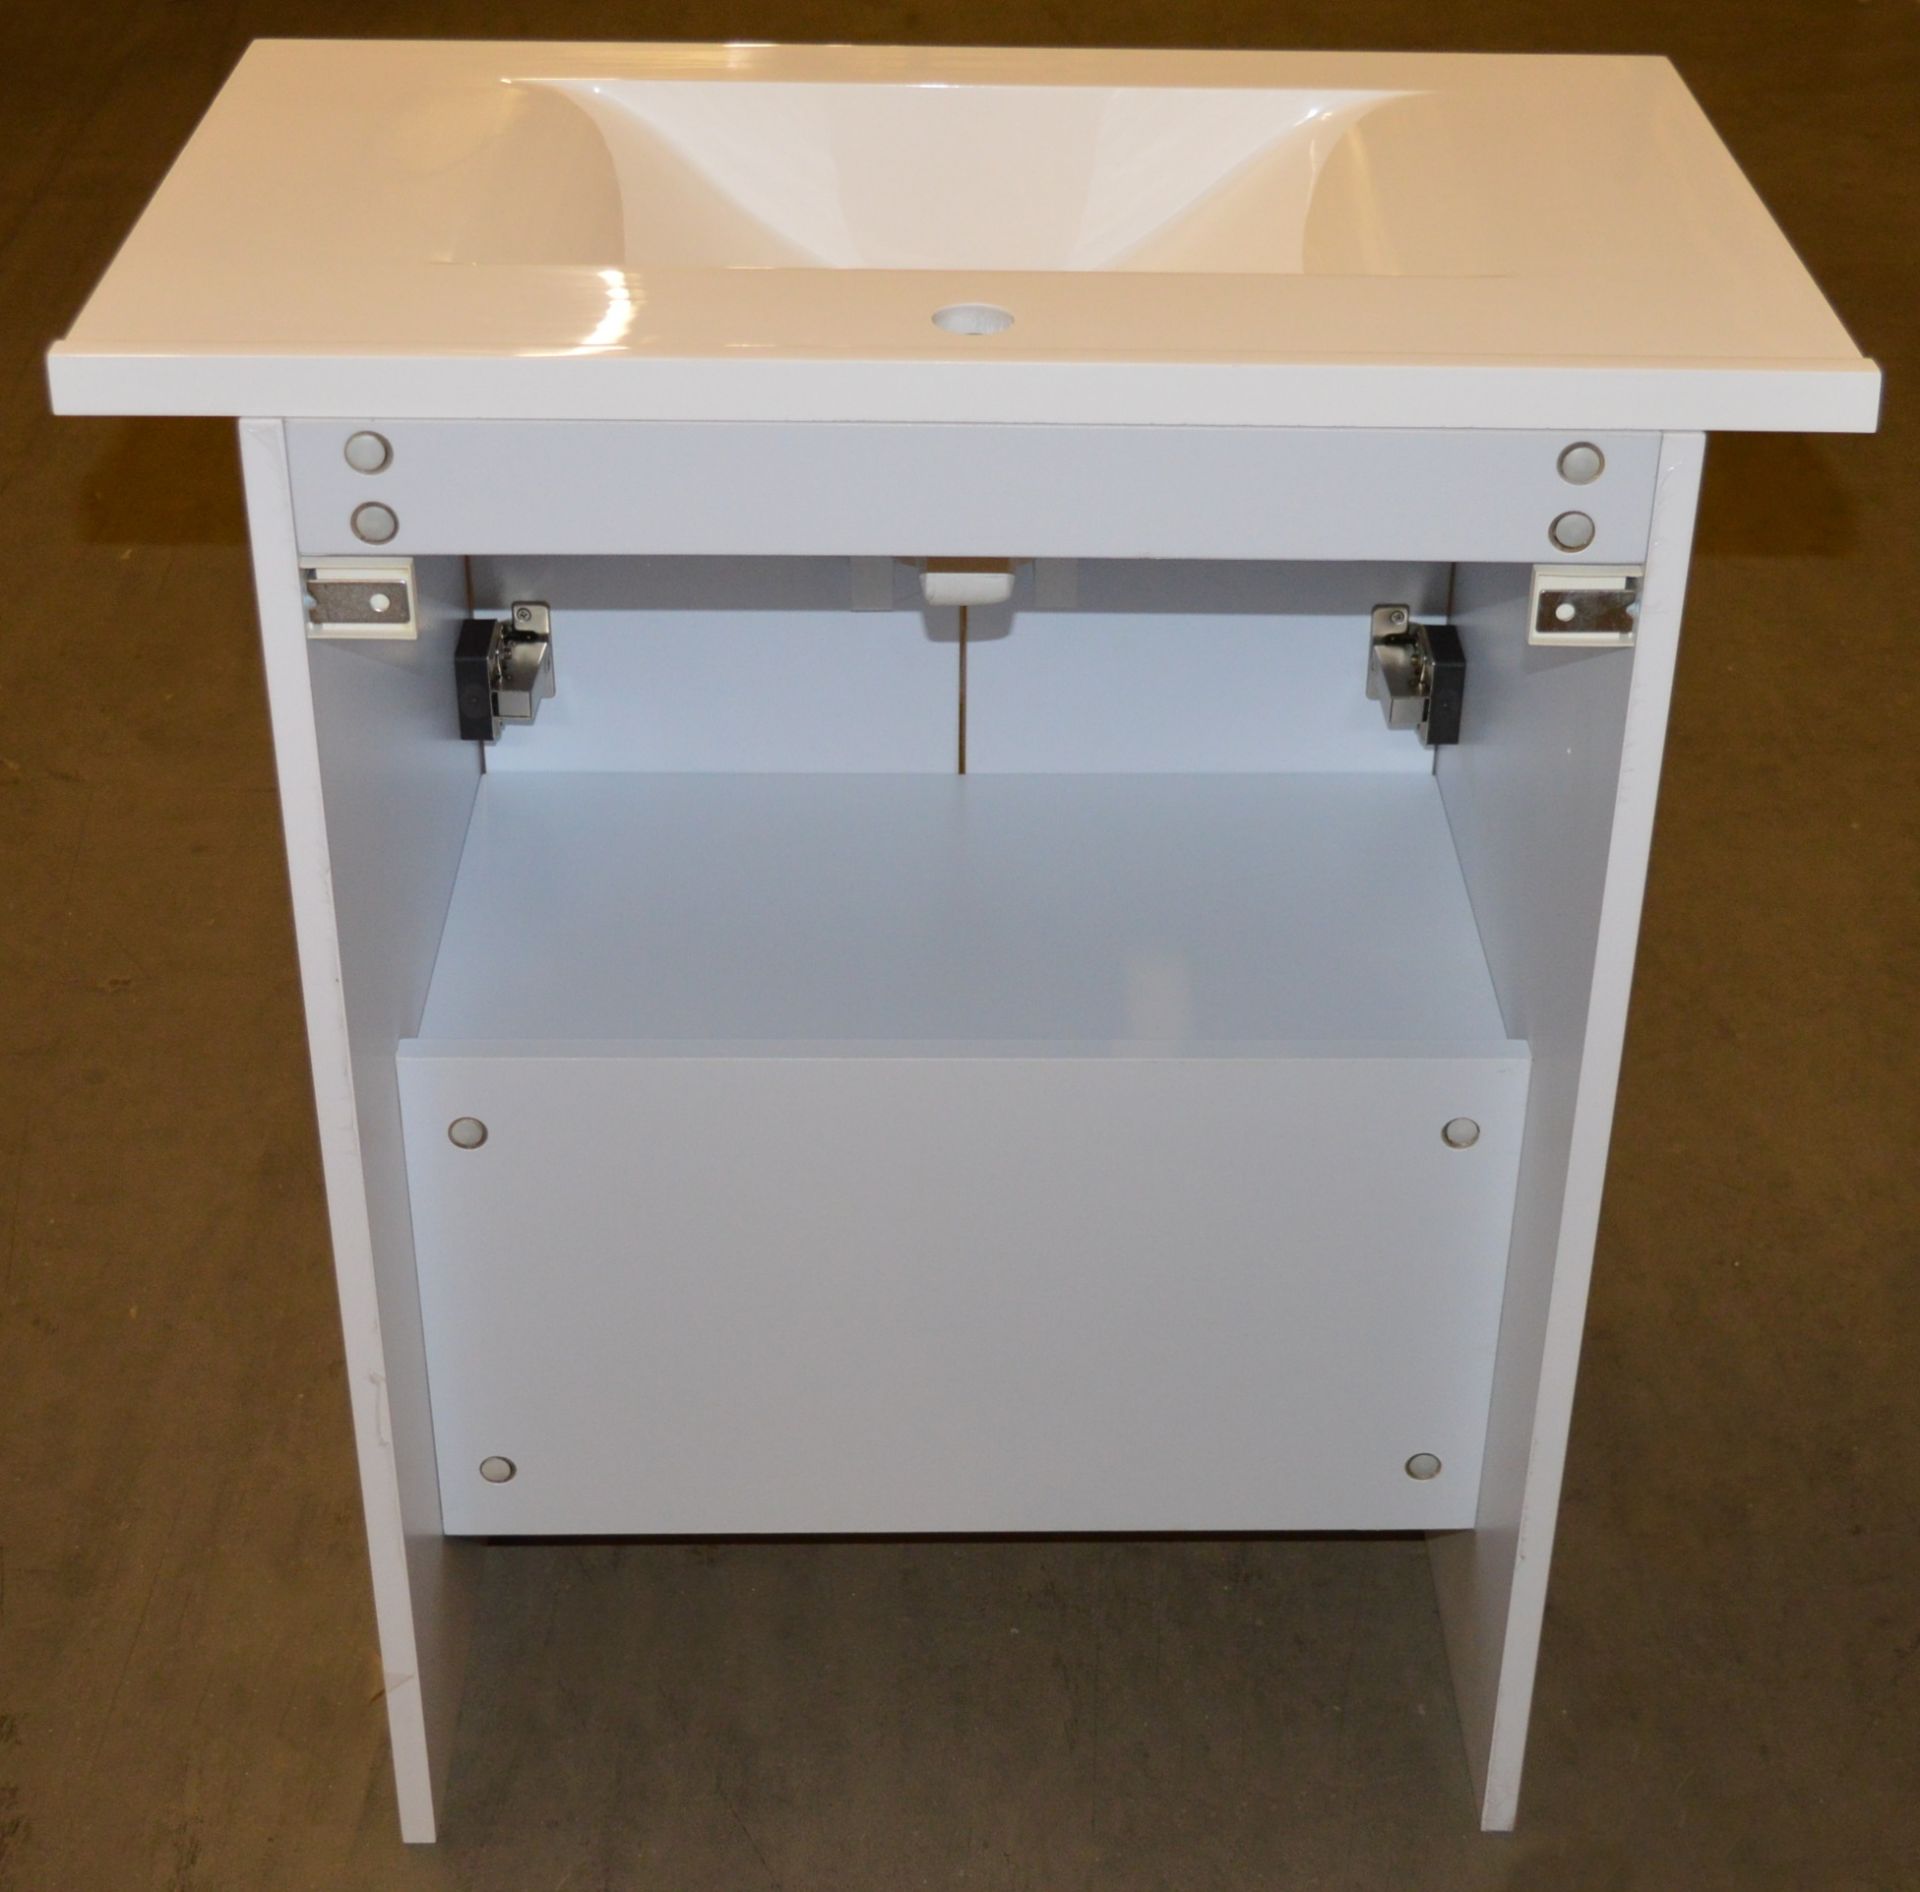 1 x Vogue Onyx White Gloss 600mm Bathroom Vanity Unit With Wash Basin - Vinyl Wrap Coating for - Image 8 of 11